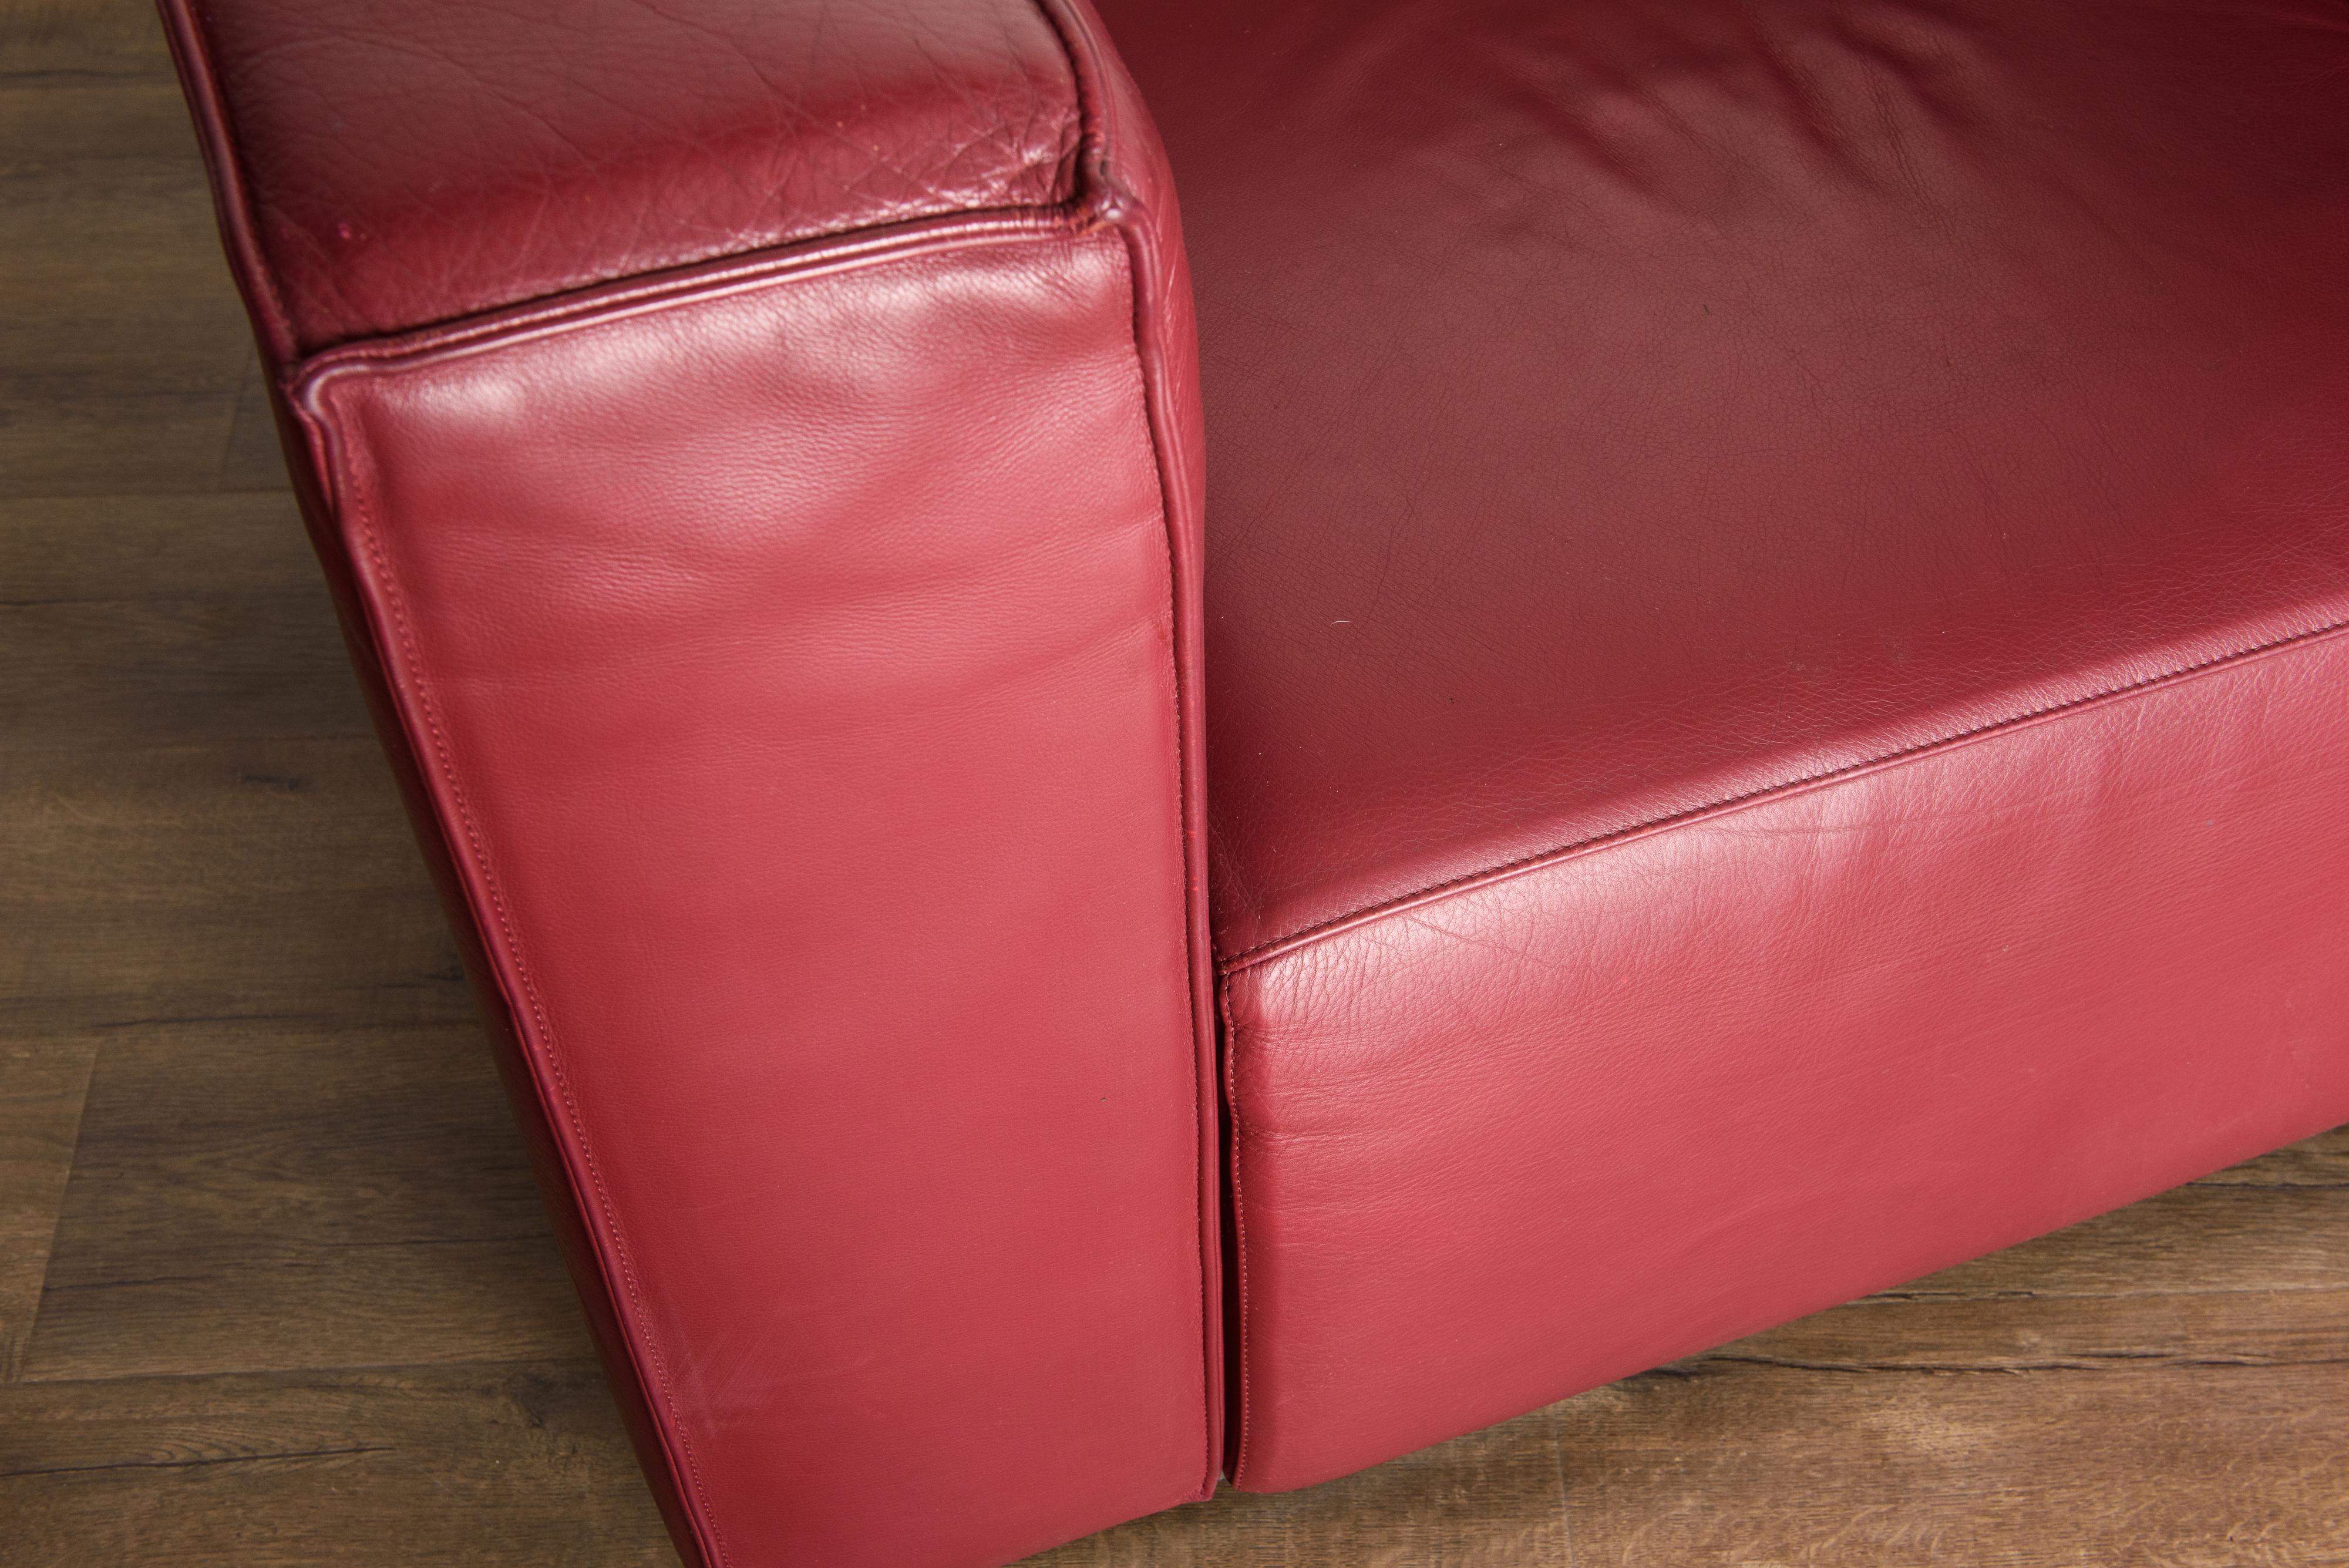 Burgundy Leather 'Blox' Club Chairs by Jehs + Laub for Cassina, 2002, Signed 3